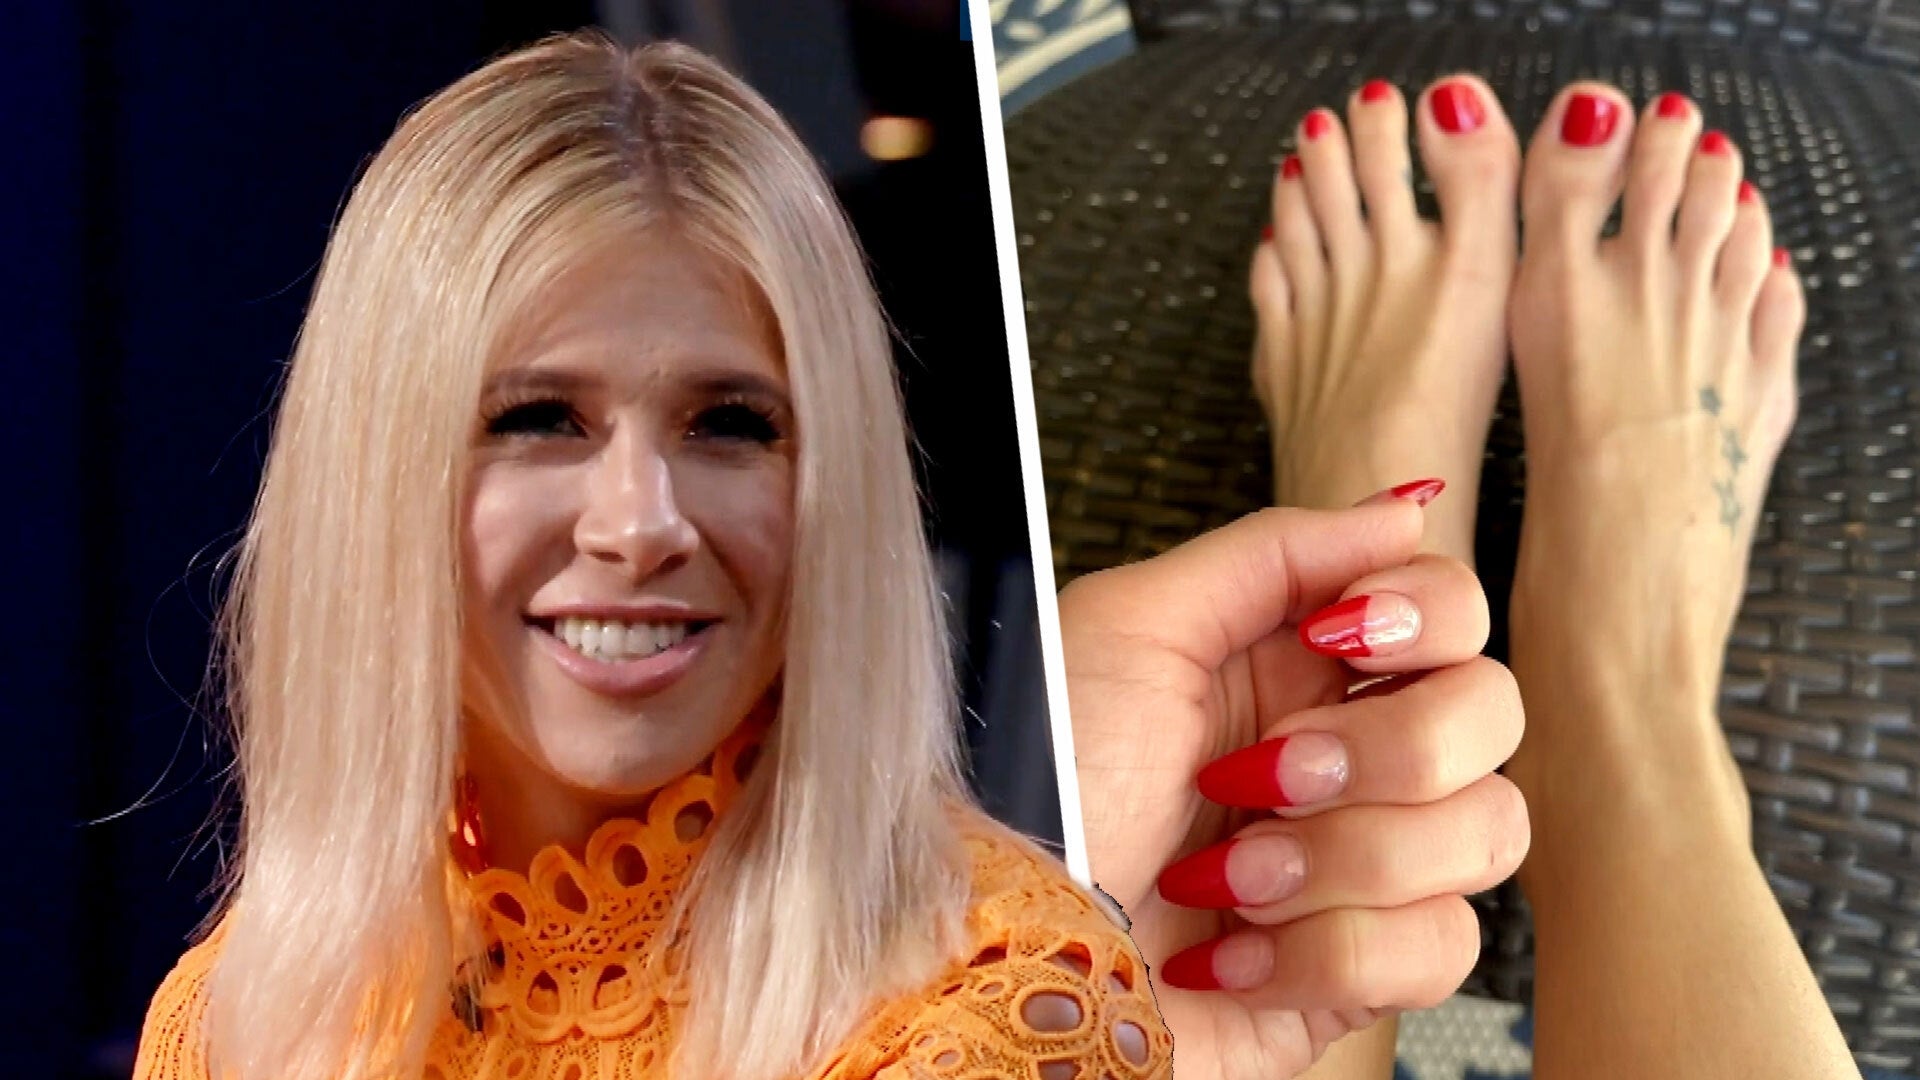 90 Day Fiancé Charlies Wife Megan Reveals She Sells Pics of Her Feet